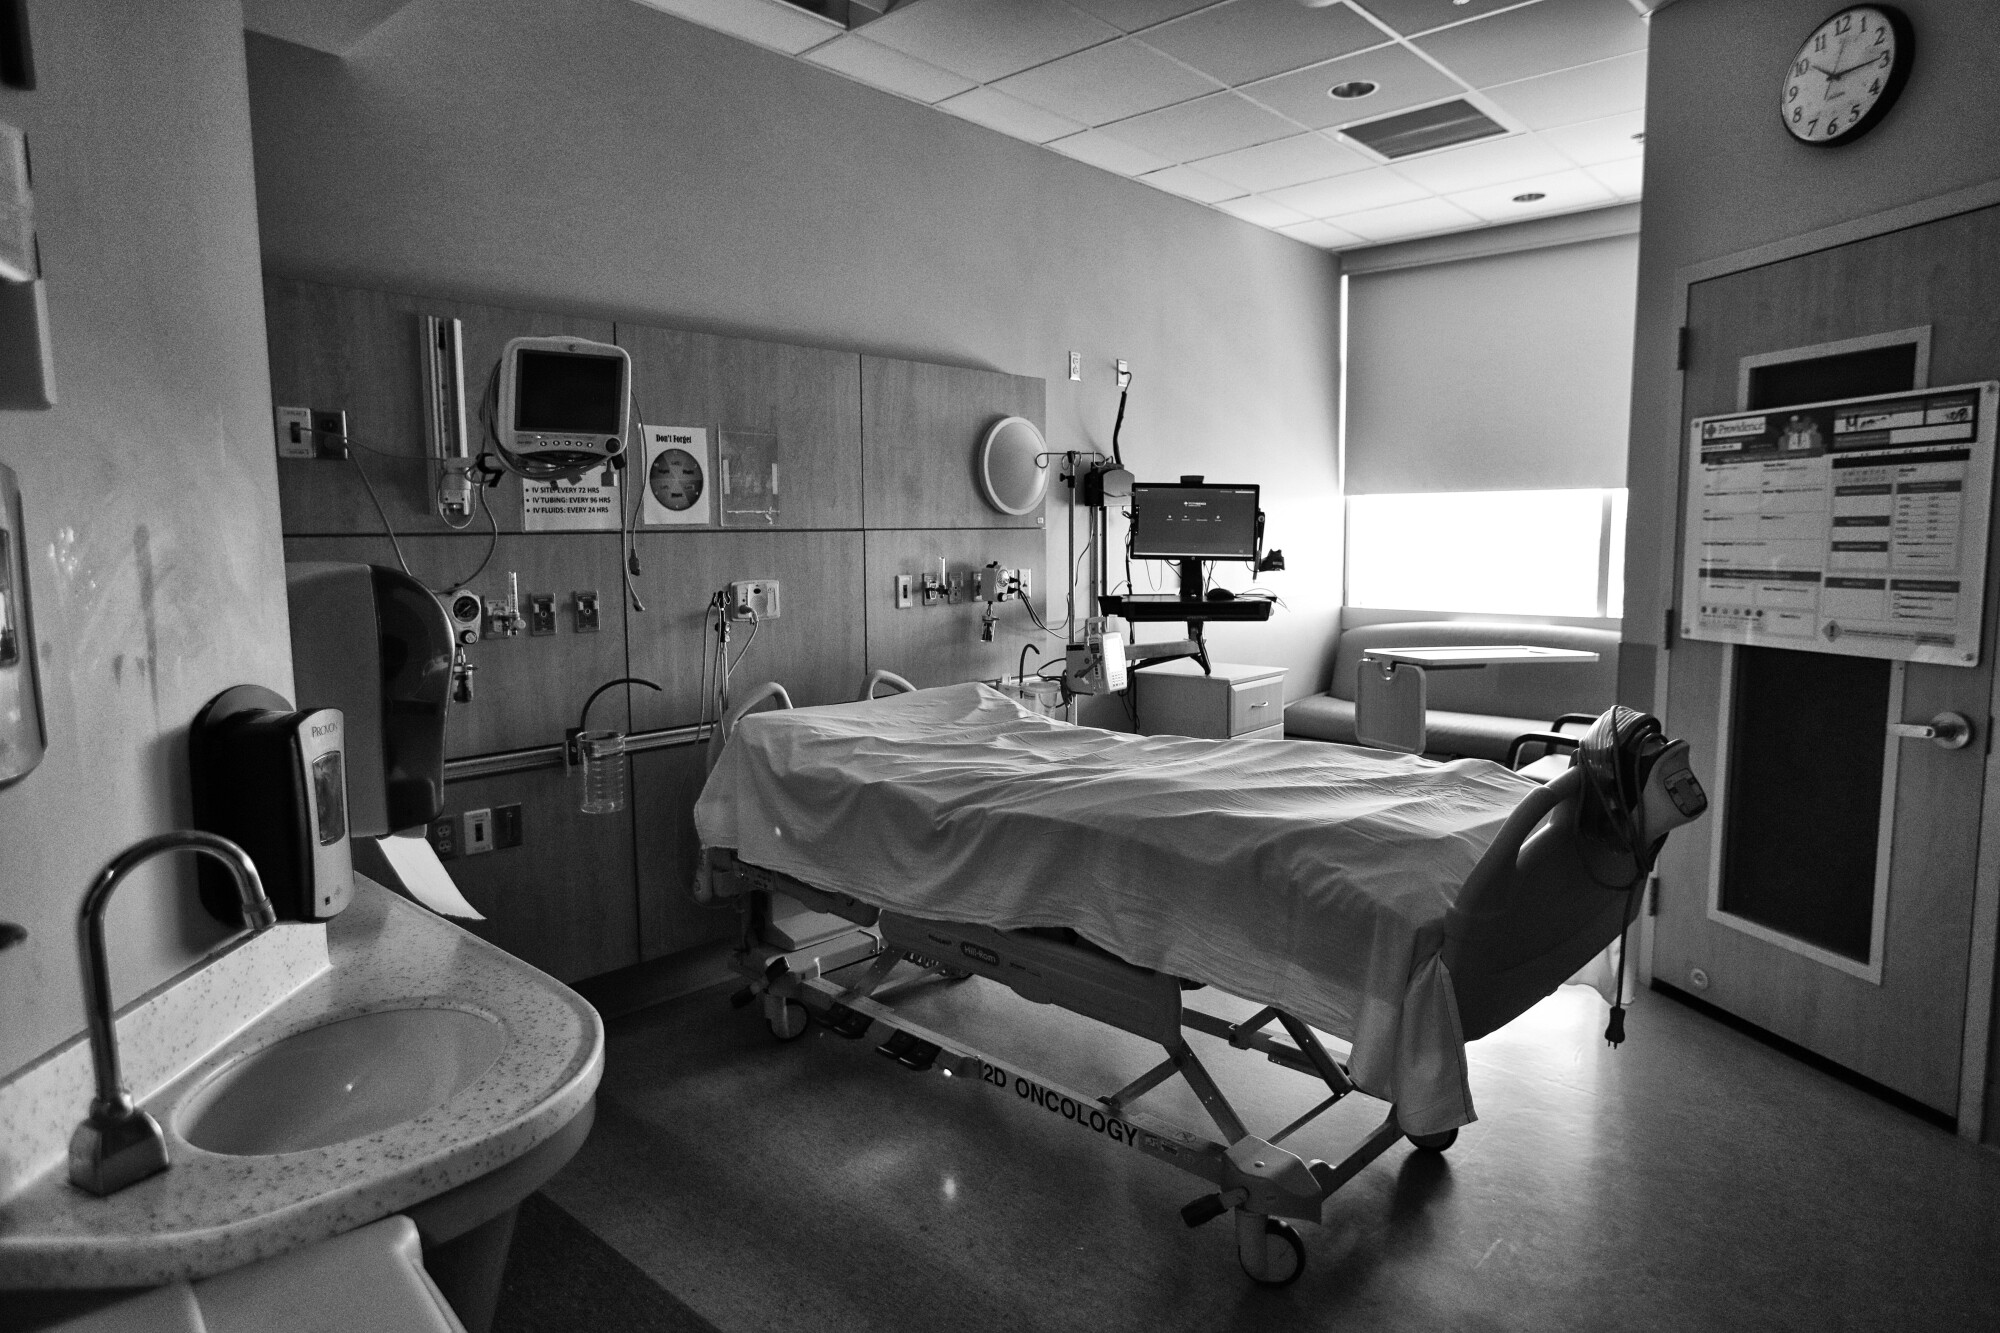 An empty hospital bed